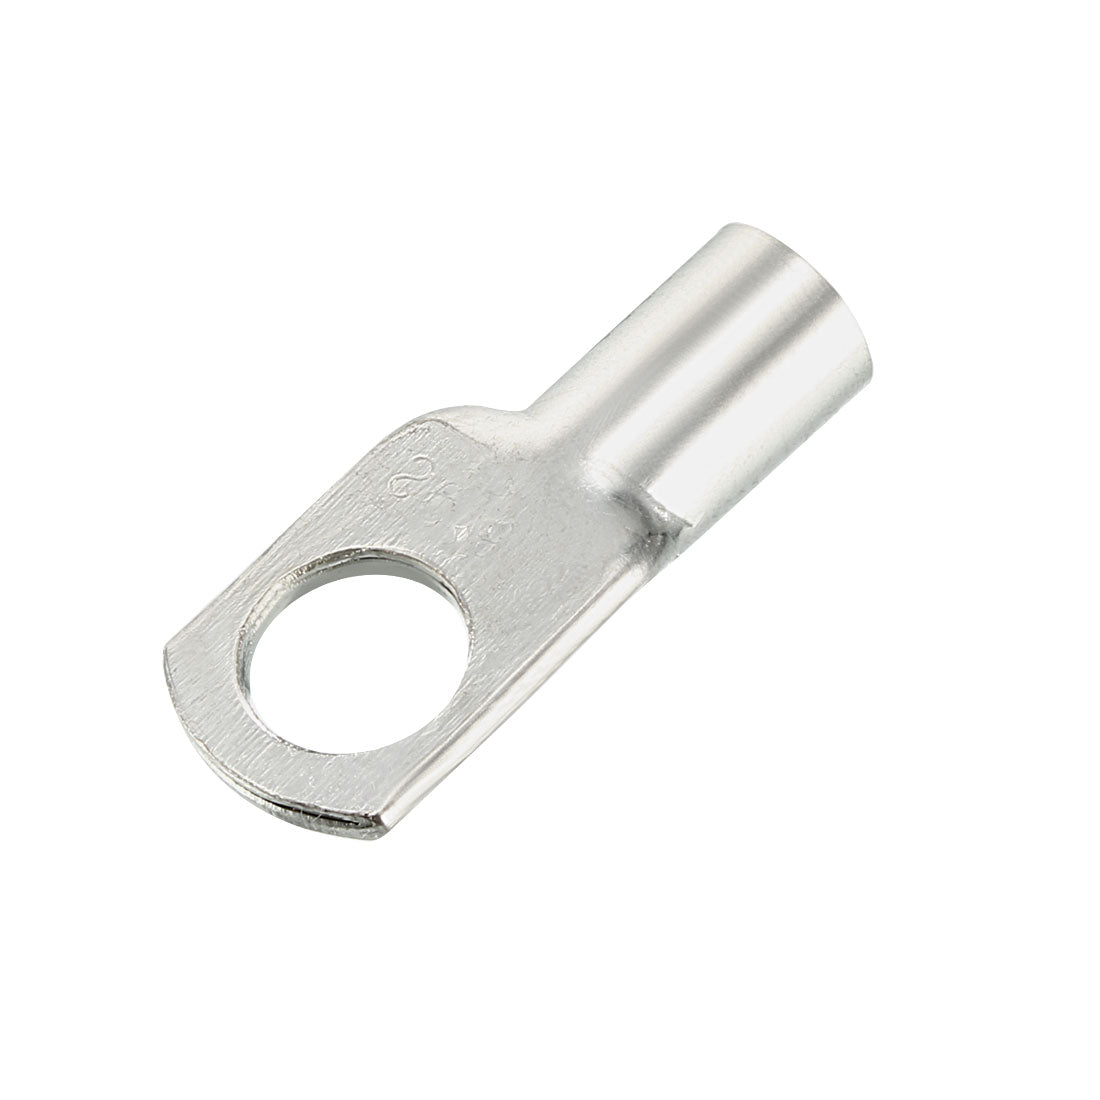 uxcell Uxcell 200Pcs SC16-8 Non-Insulated U-Type Copper Crimp Terminals 16mm2 Wire Connector Silver Tone